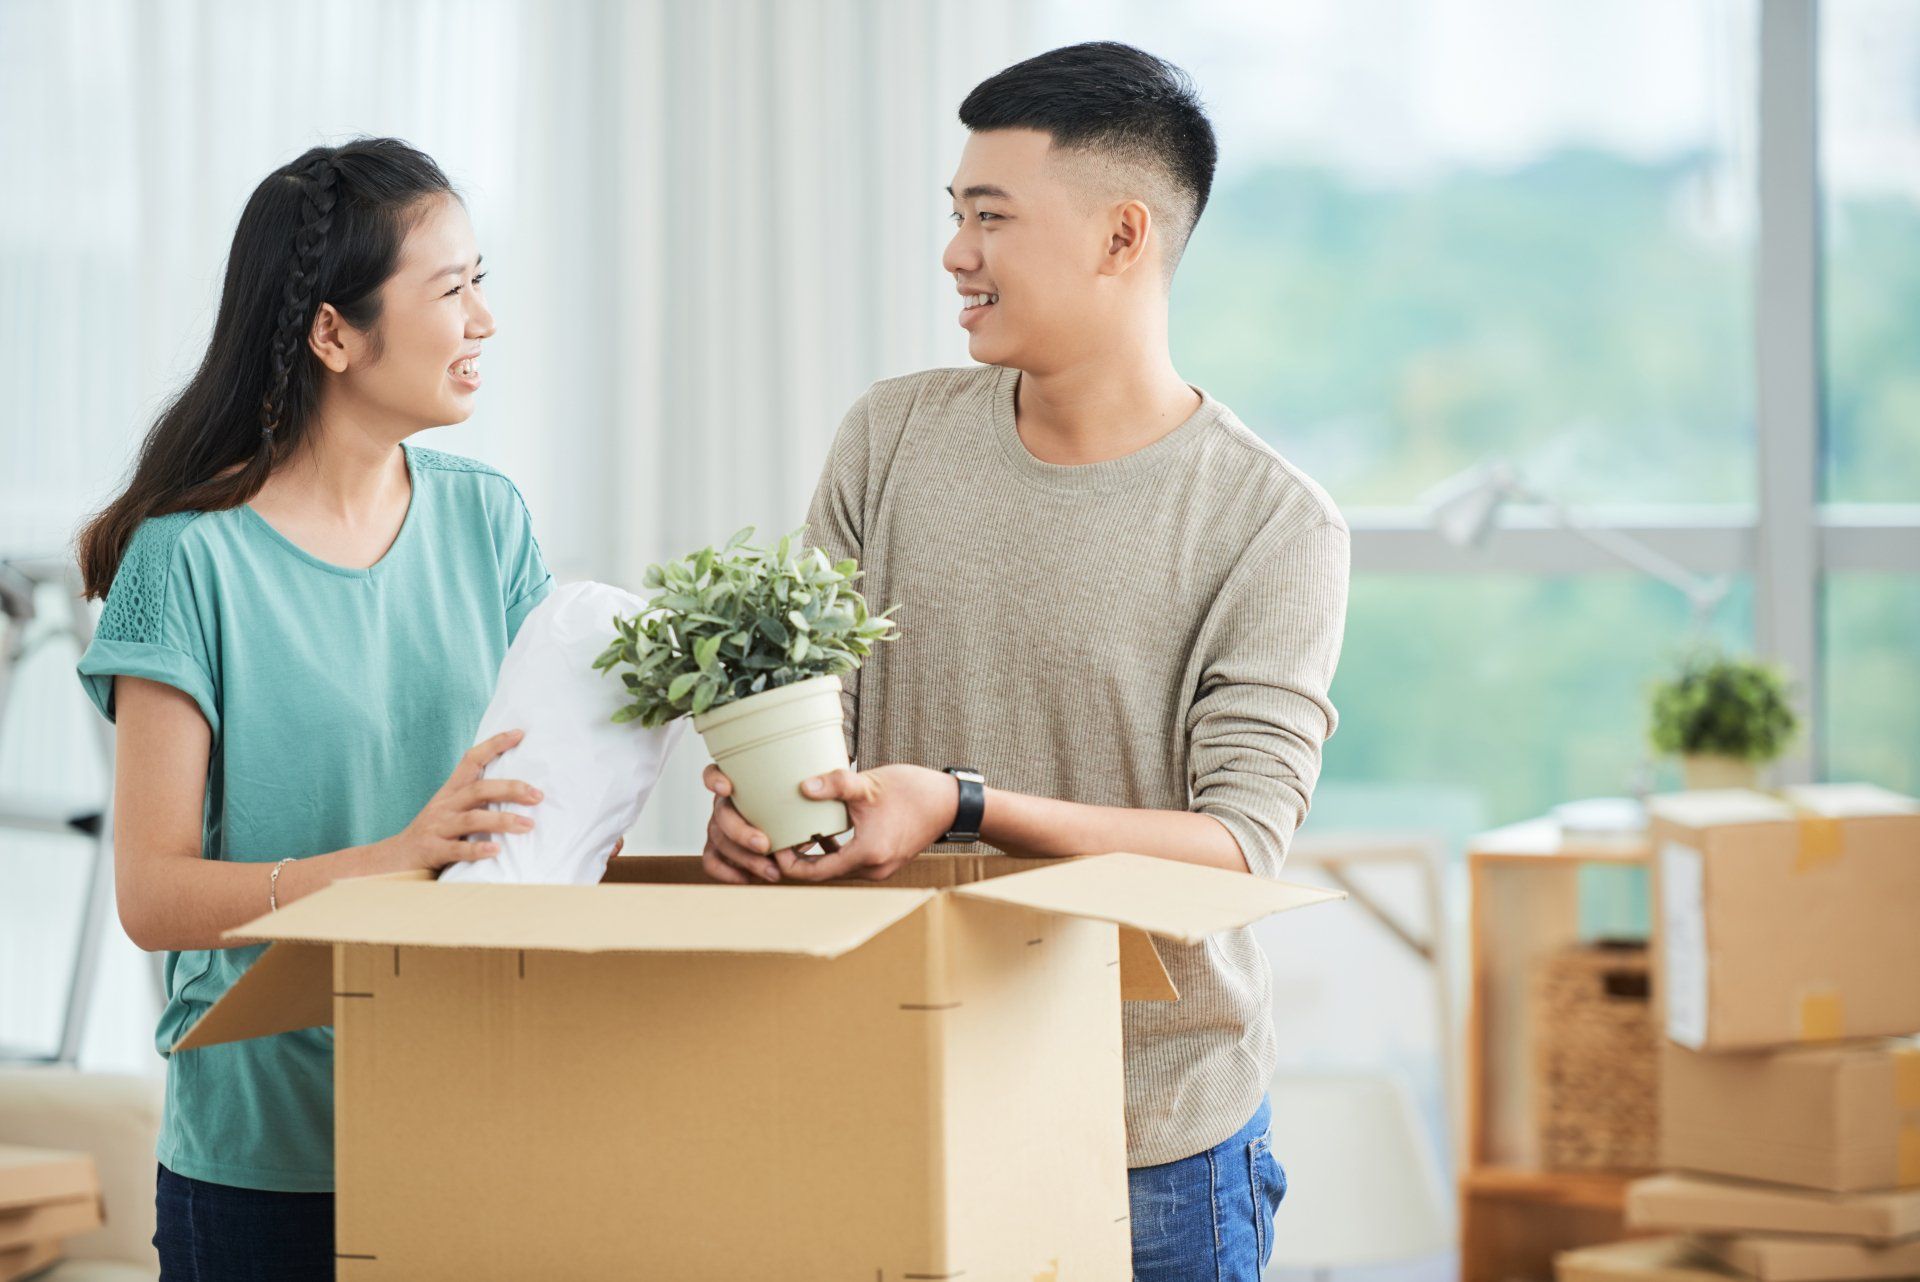 Residential moving company in Edmonton, CA